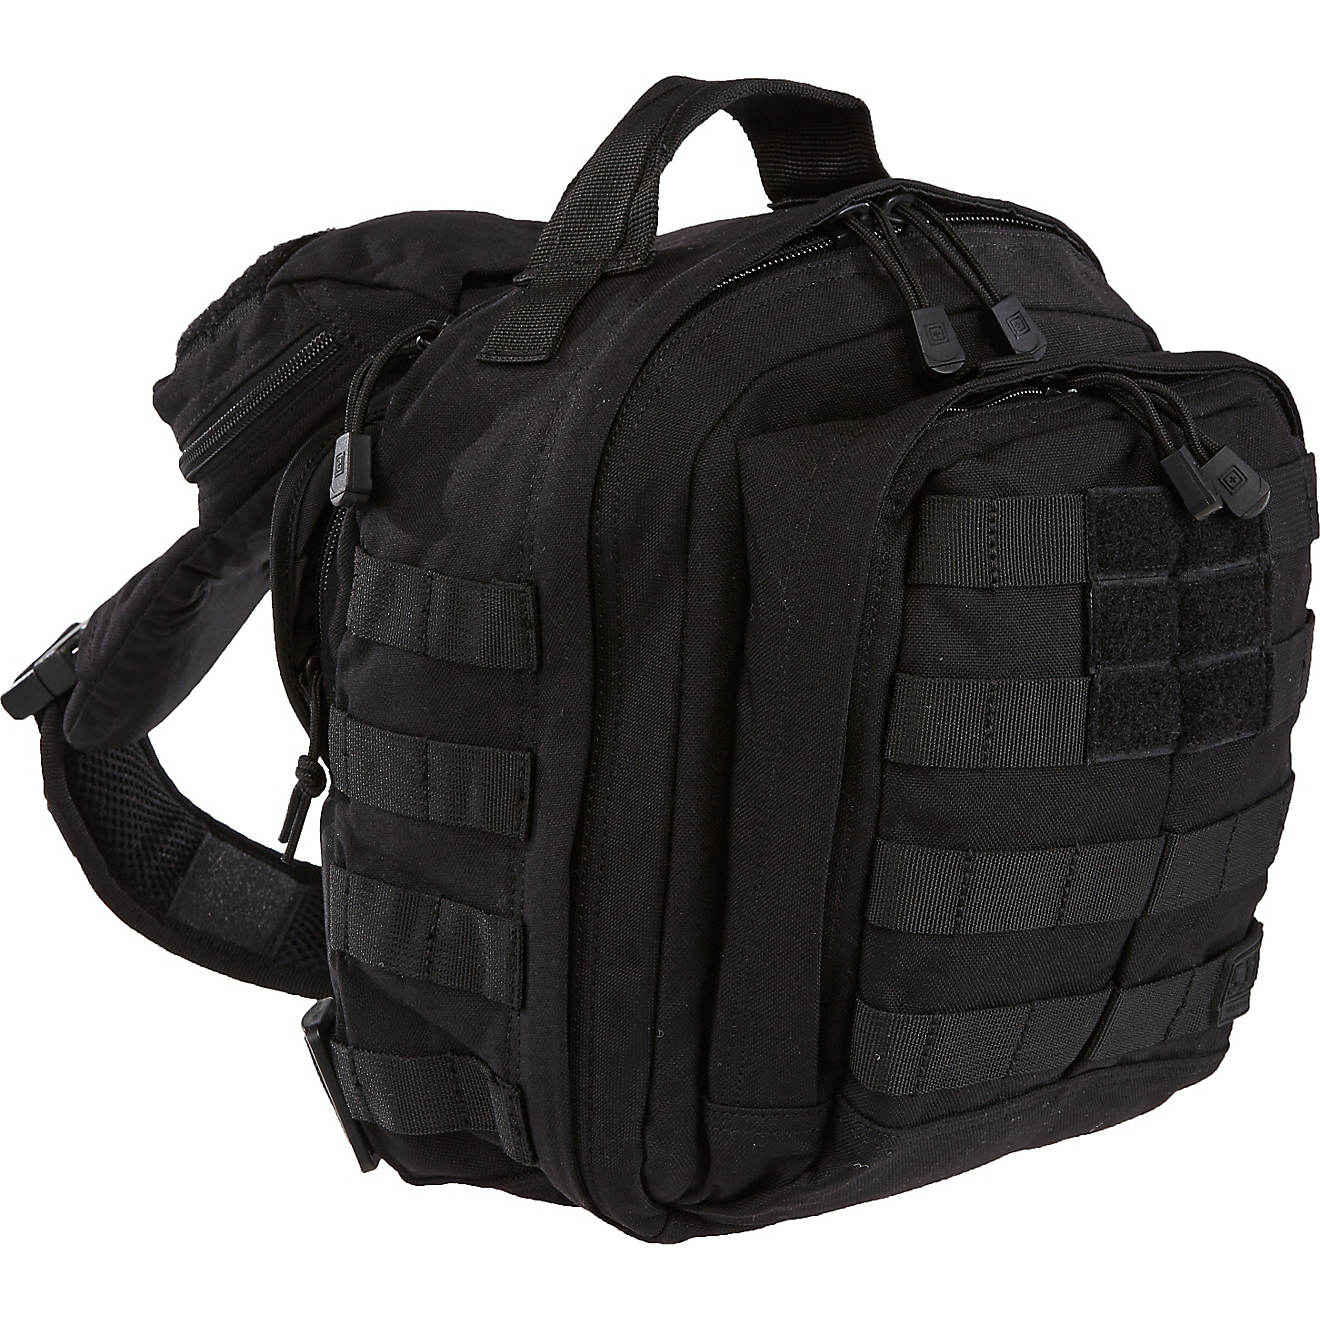 Black 5.11 Tactical Rush Moab 6 bag pack New with tags 